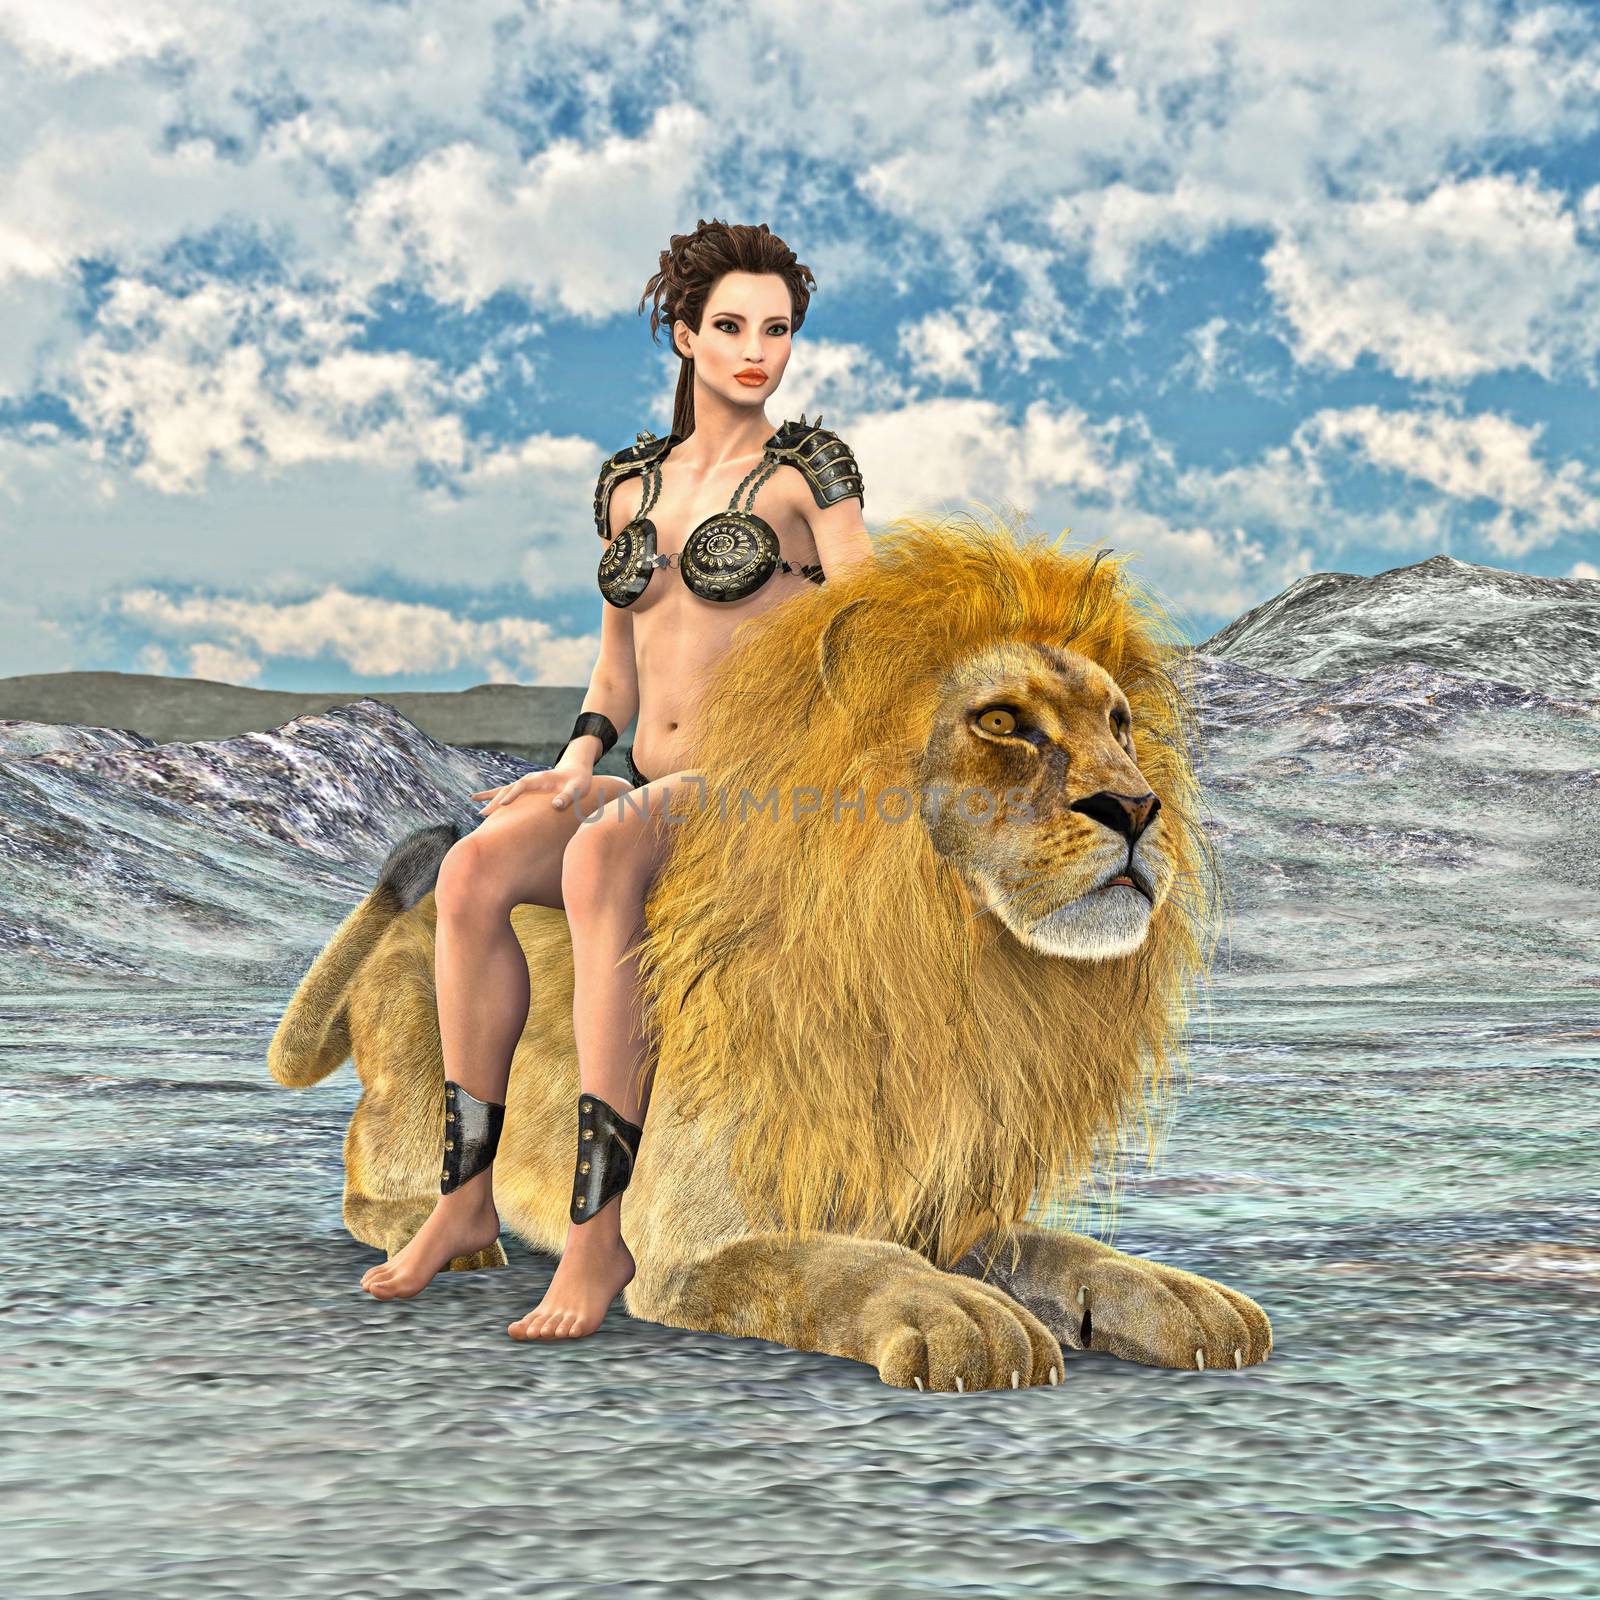 3D digital render of a beautiful young woman and a lion on a desert landscape background